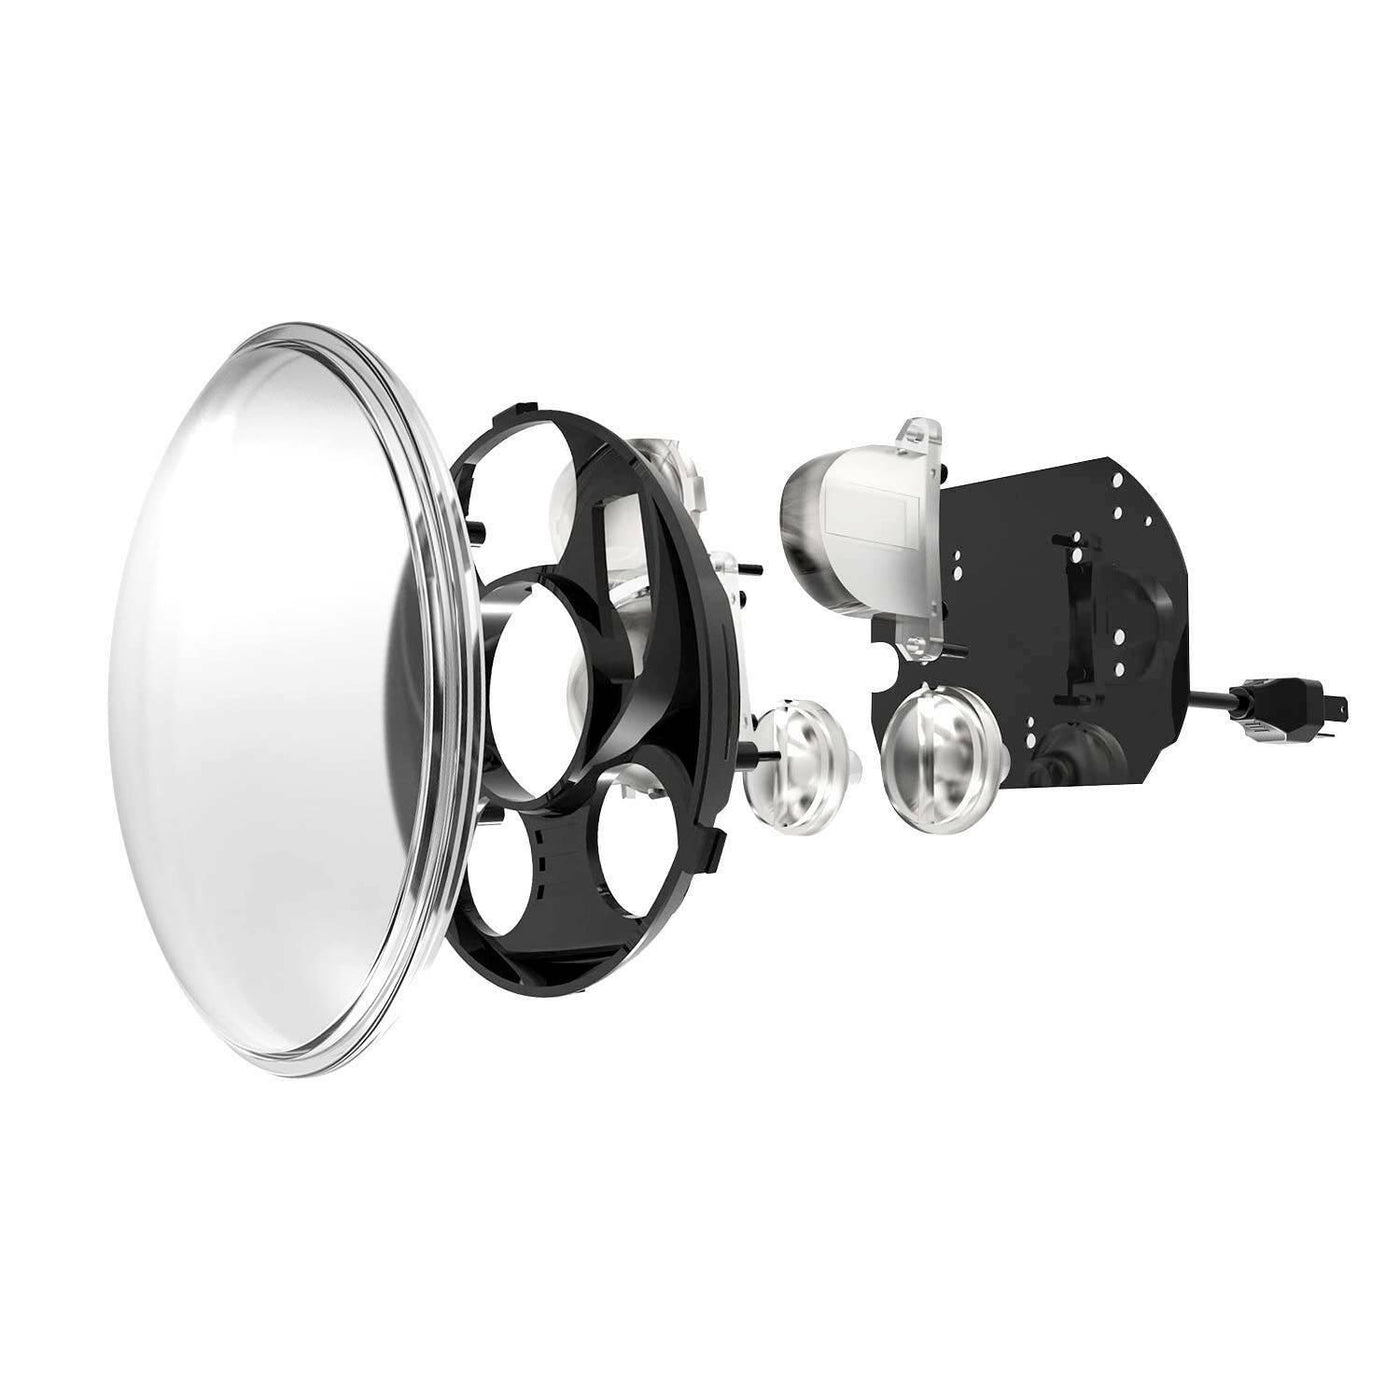 5-3/4" 5.75" Projector LED Headlight Fit For Harley Sportster XL 883 1200 Black - Moto Life Products